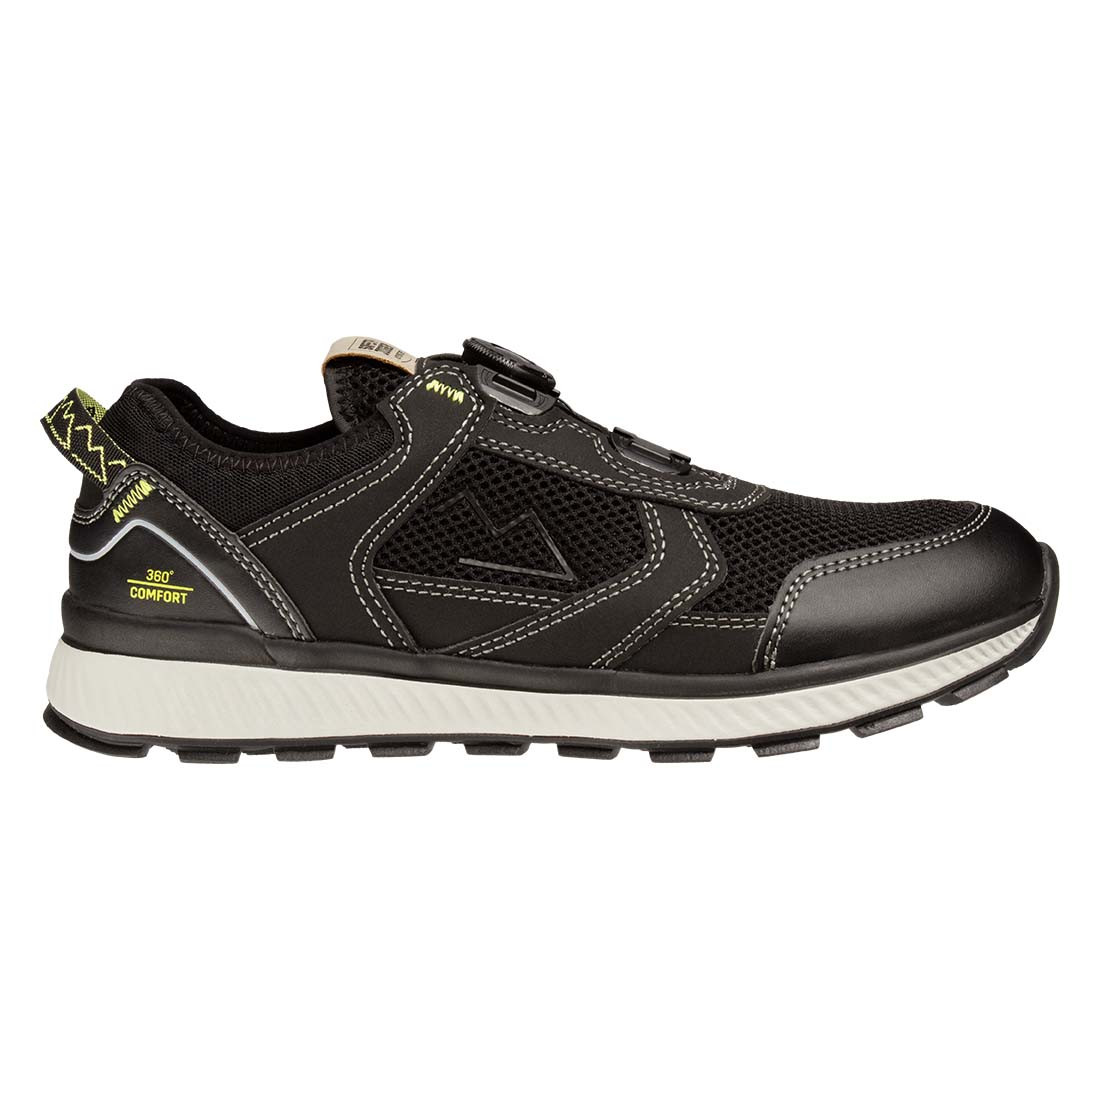 COLORADO Lightweight and washable sneakers - Footwear